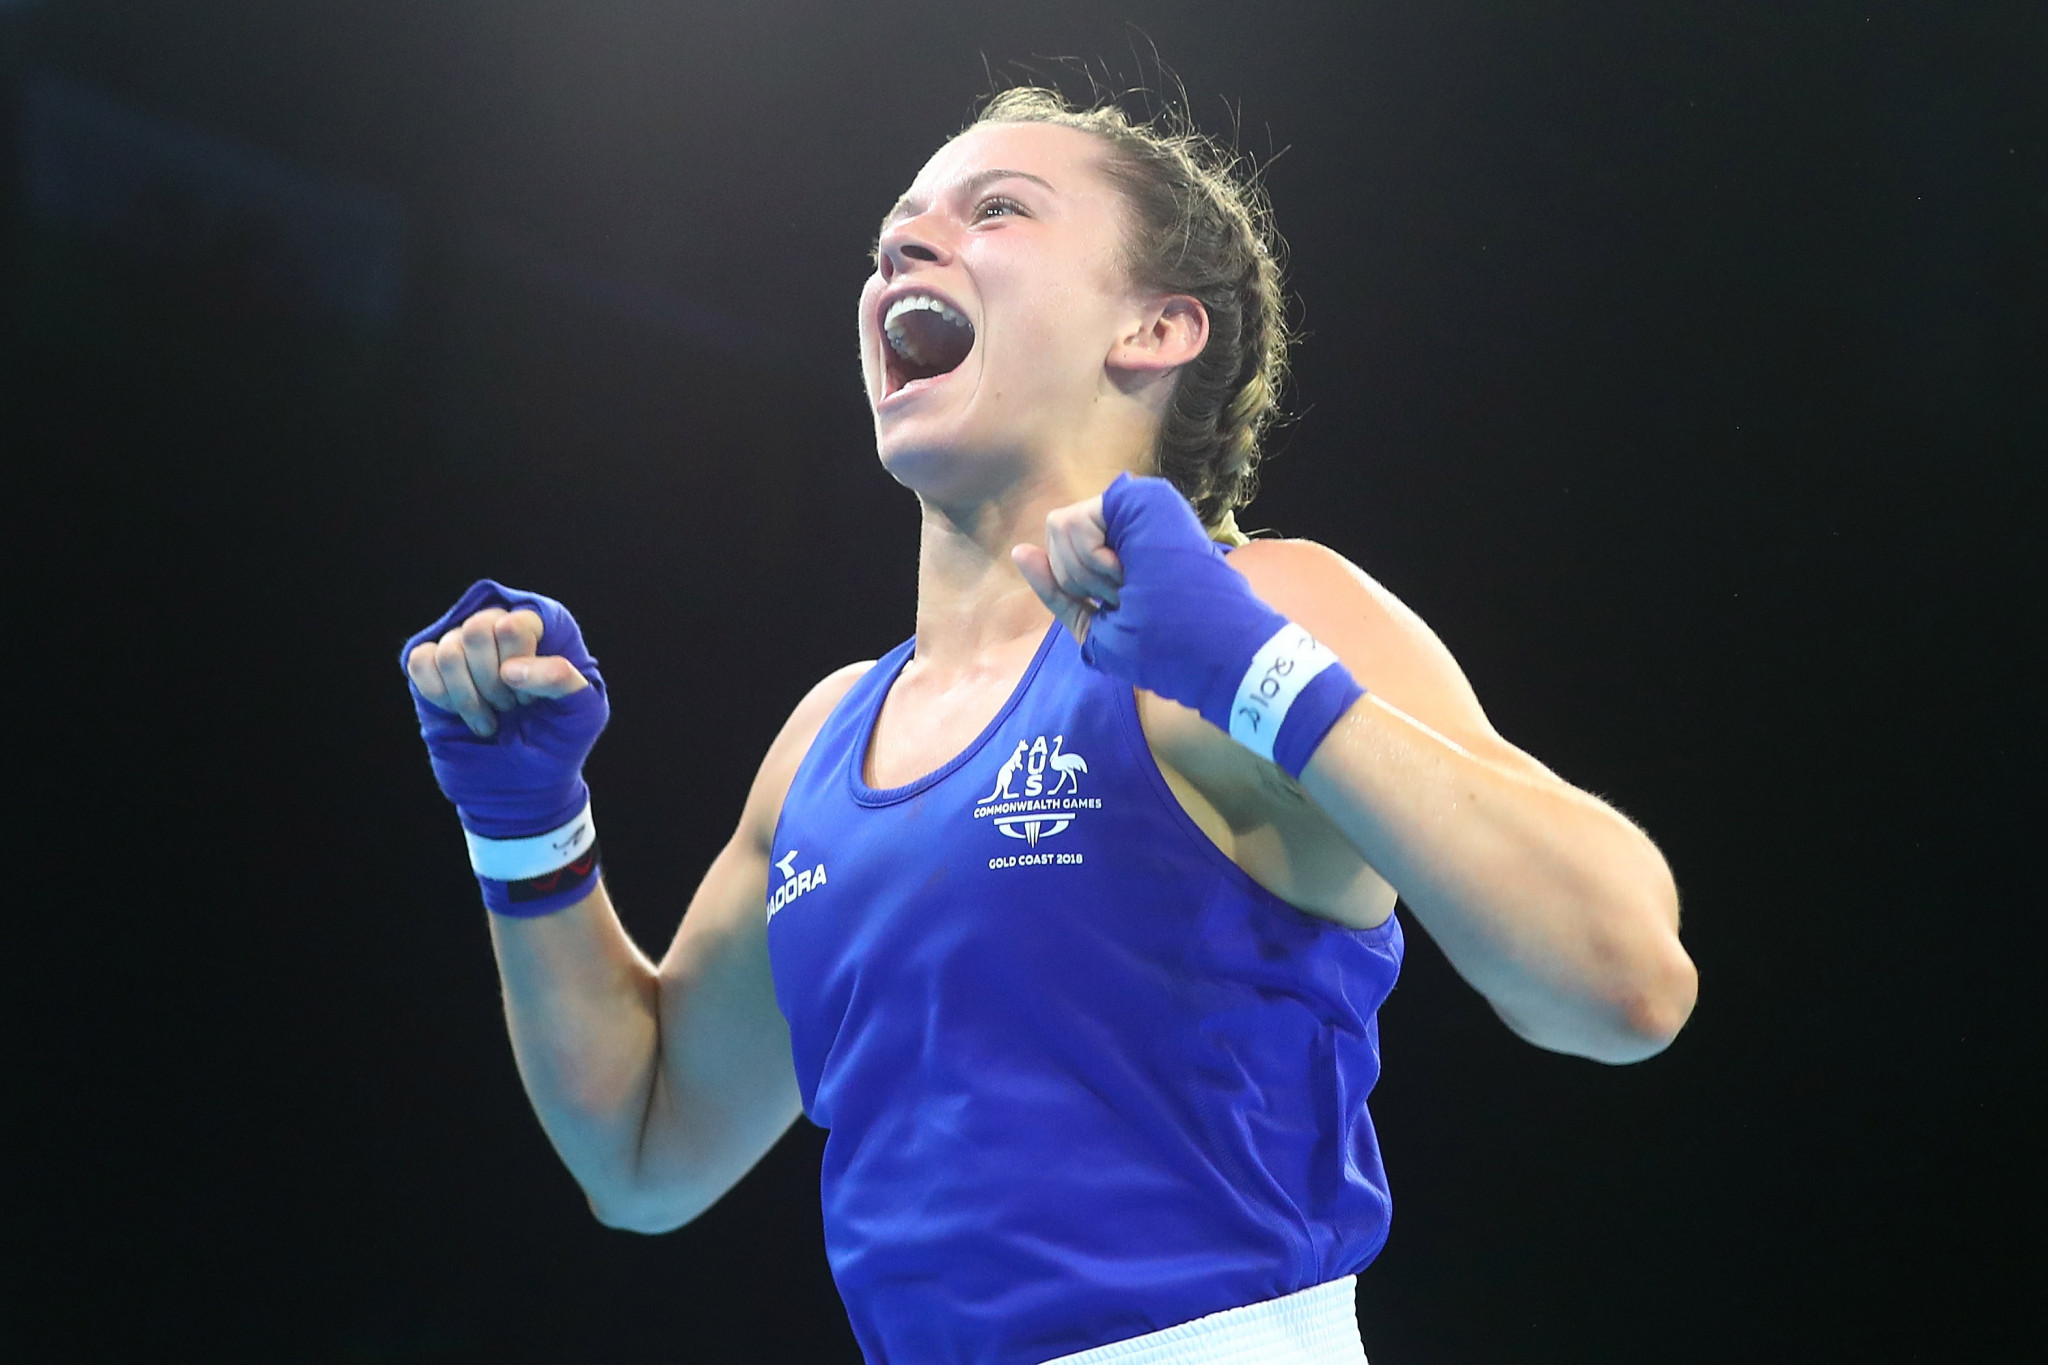 Skye Nicolson was one of three Commonwealth Games boxing champions from Australia at Gold Coast 2018 ©Getty Images